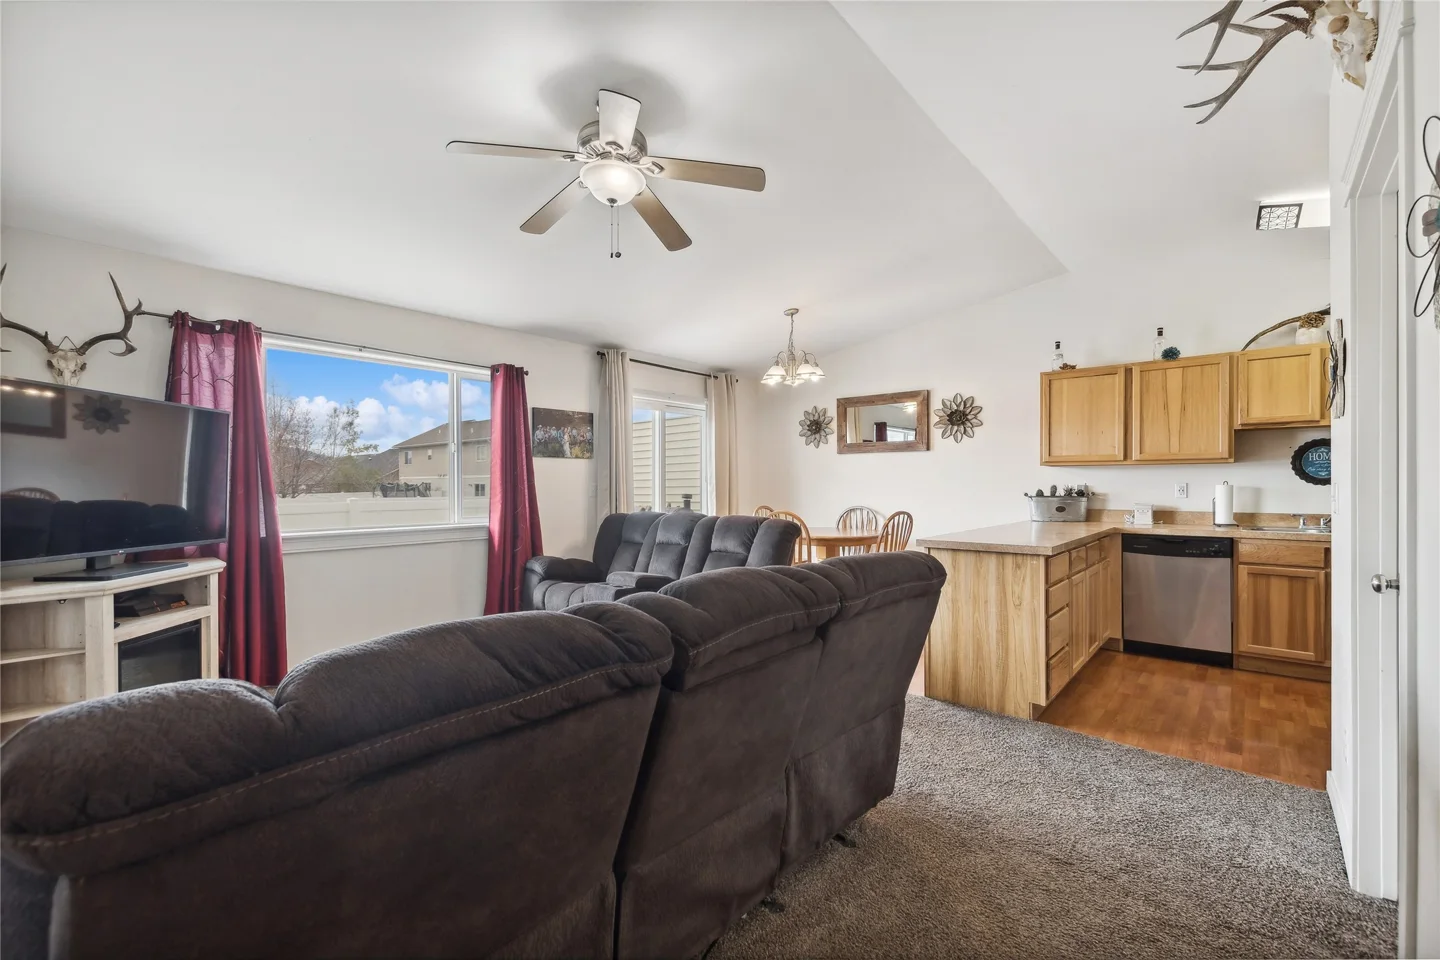 This Kalispell townhome is cute as can be!